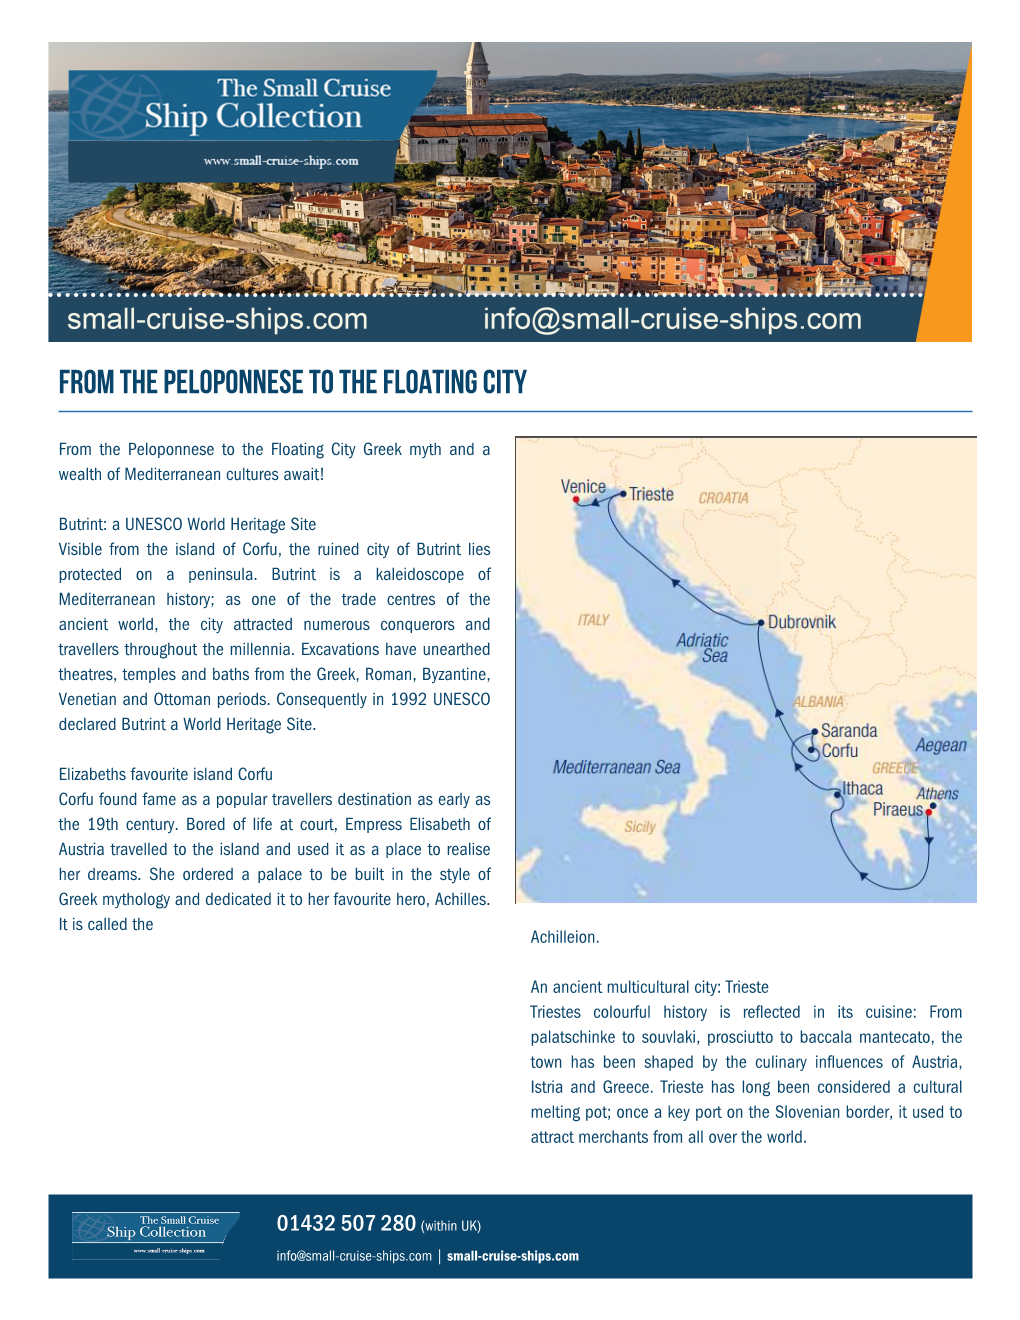 From the Peloponnese to the Floating City